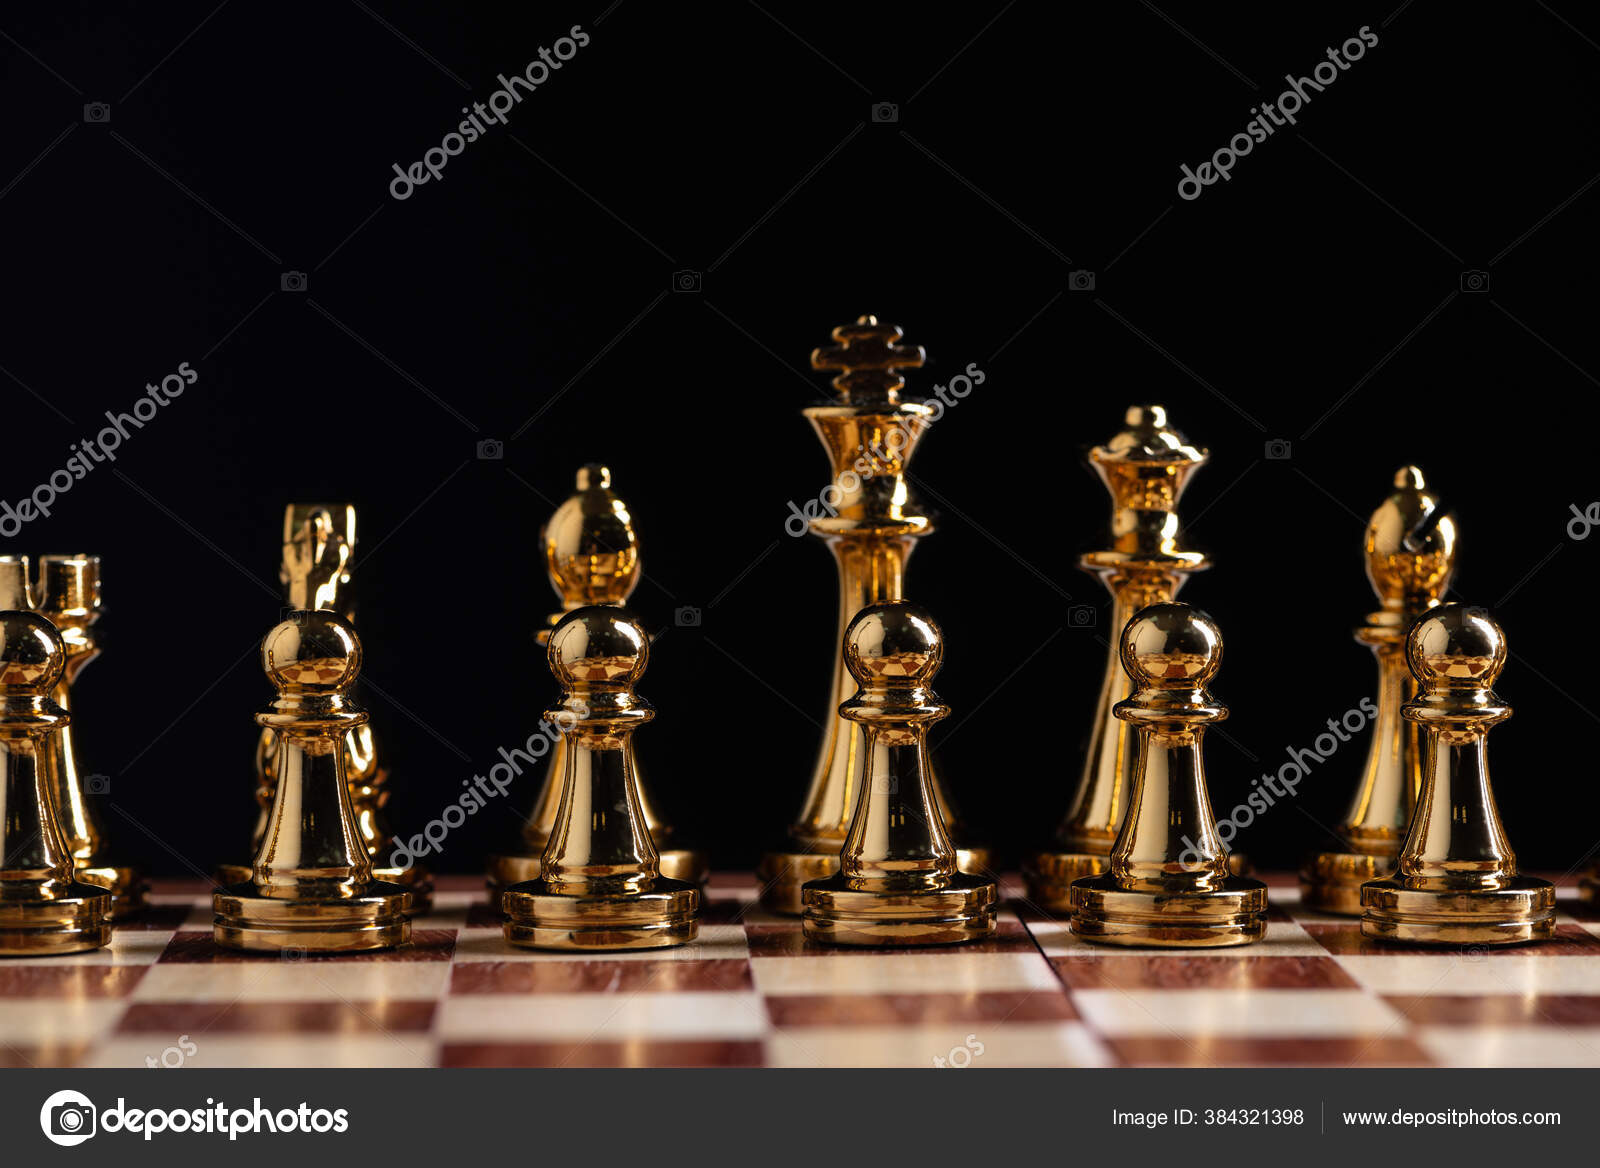 King chess standing on chess board. Business planning, strategy